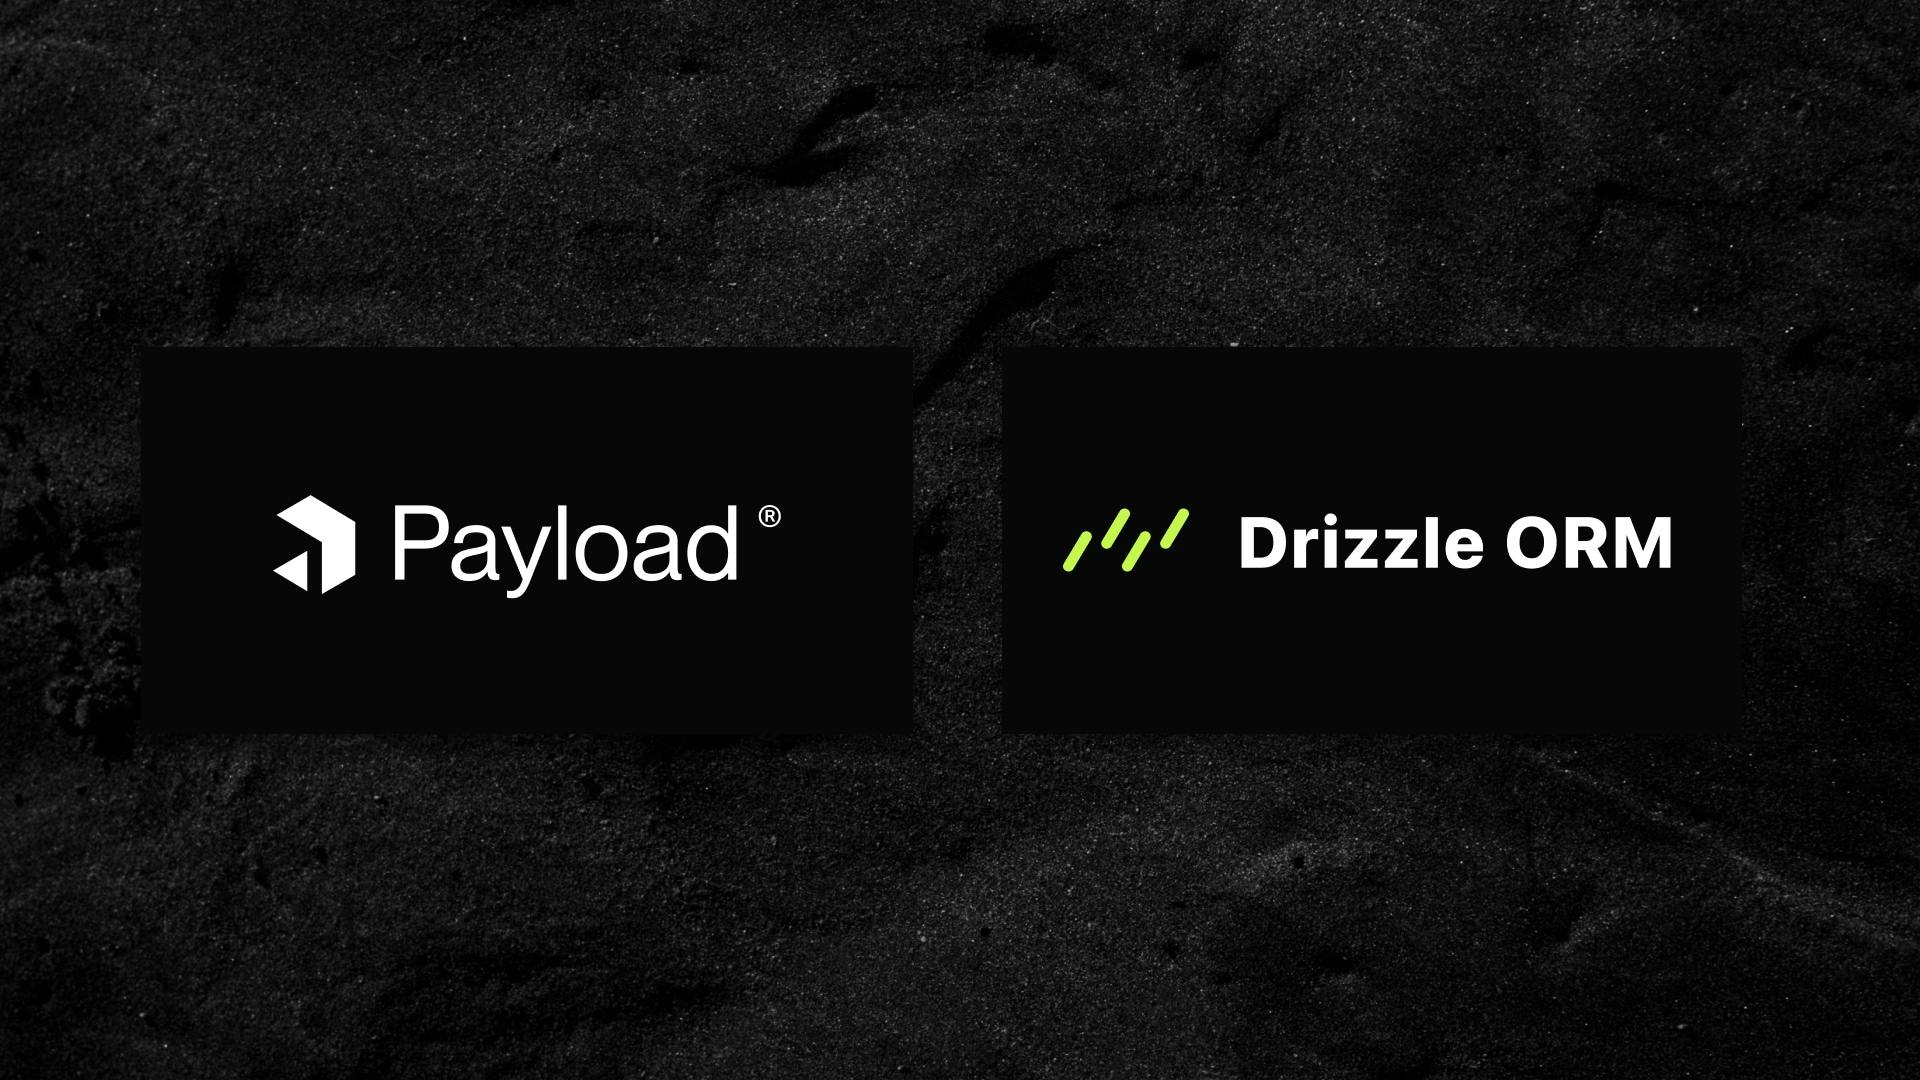 Payload Relational Database Support - Drizzle ORM